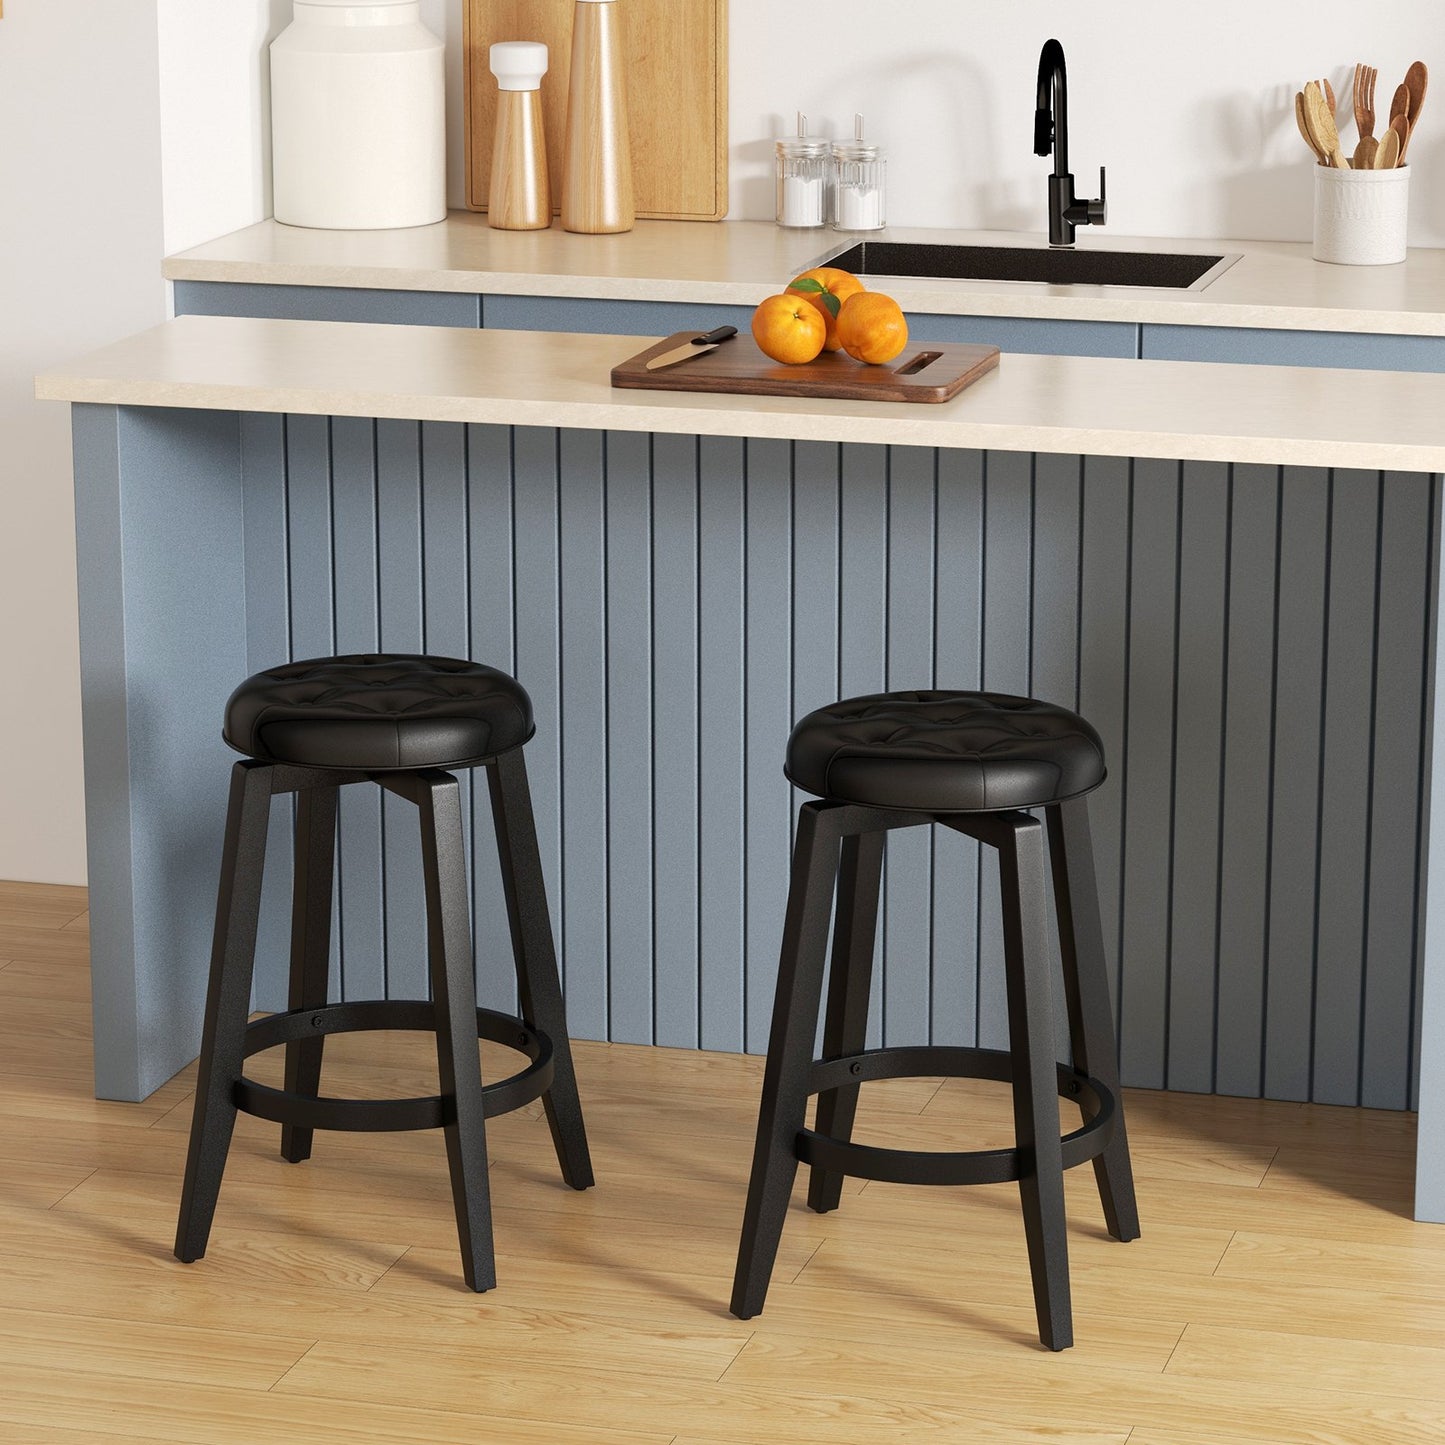 360° Swivel Upholstered Rubberwood Frame Bar Stool Set of 2 with Footrest-24 inches, Black